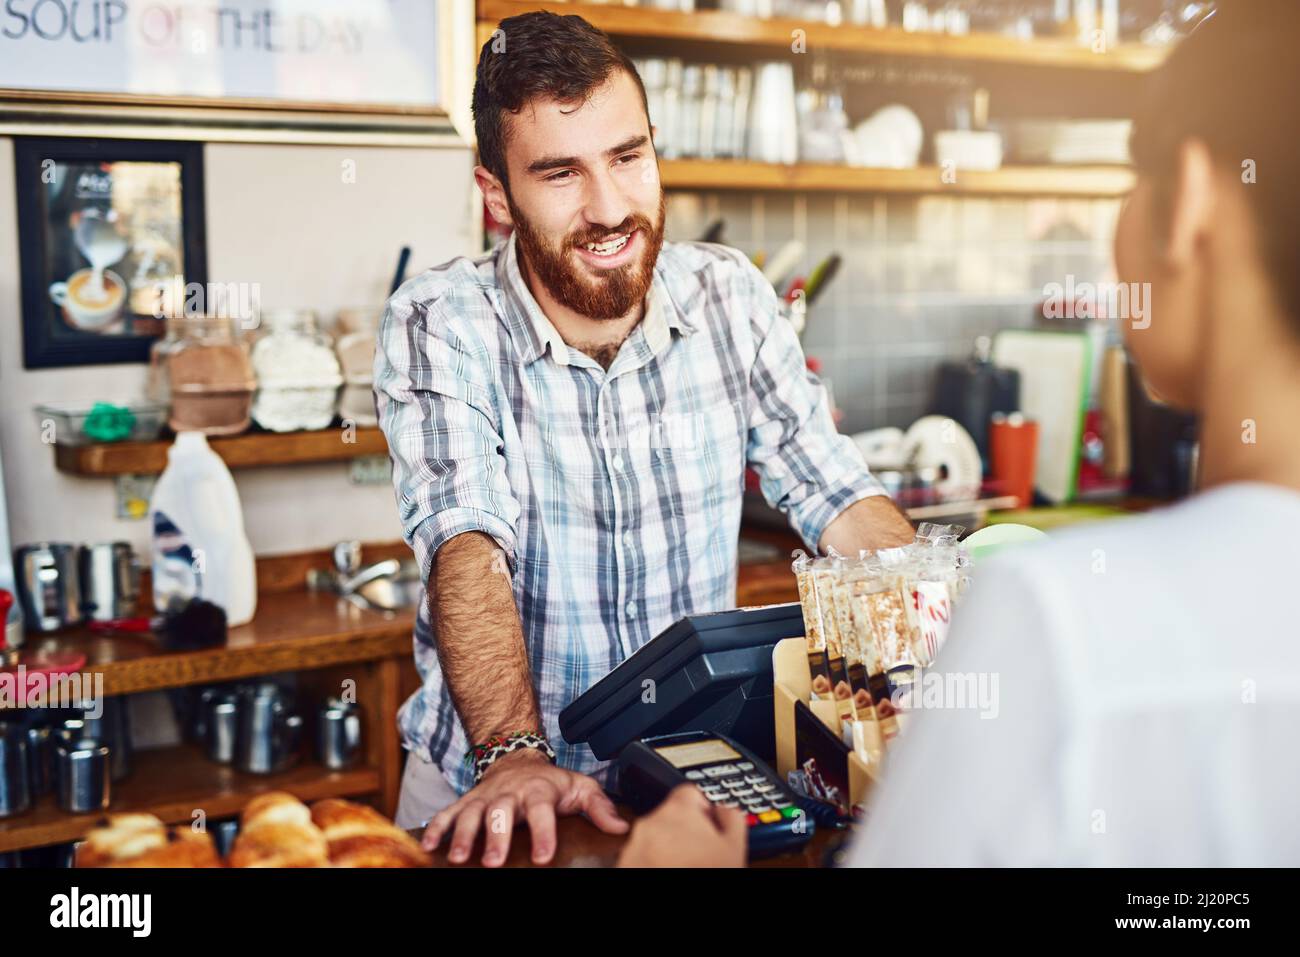 Good customer service is what makes them come back. Shot of a shop assistant helping a customer in a cafe. Stock Photo